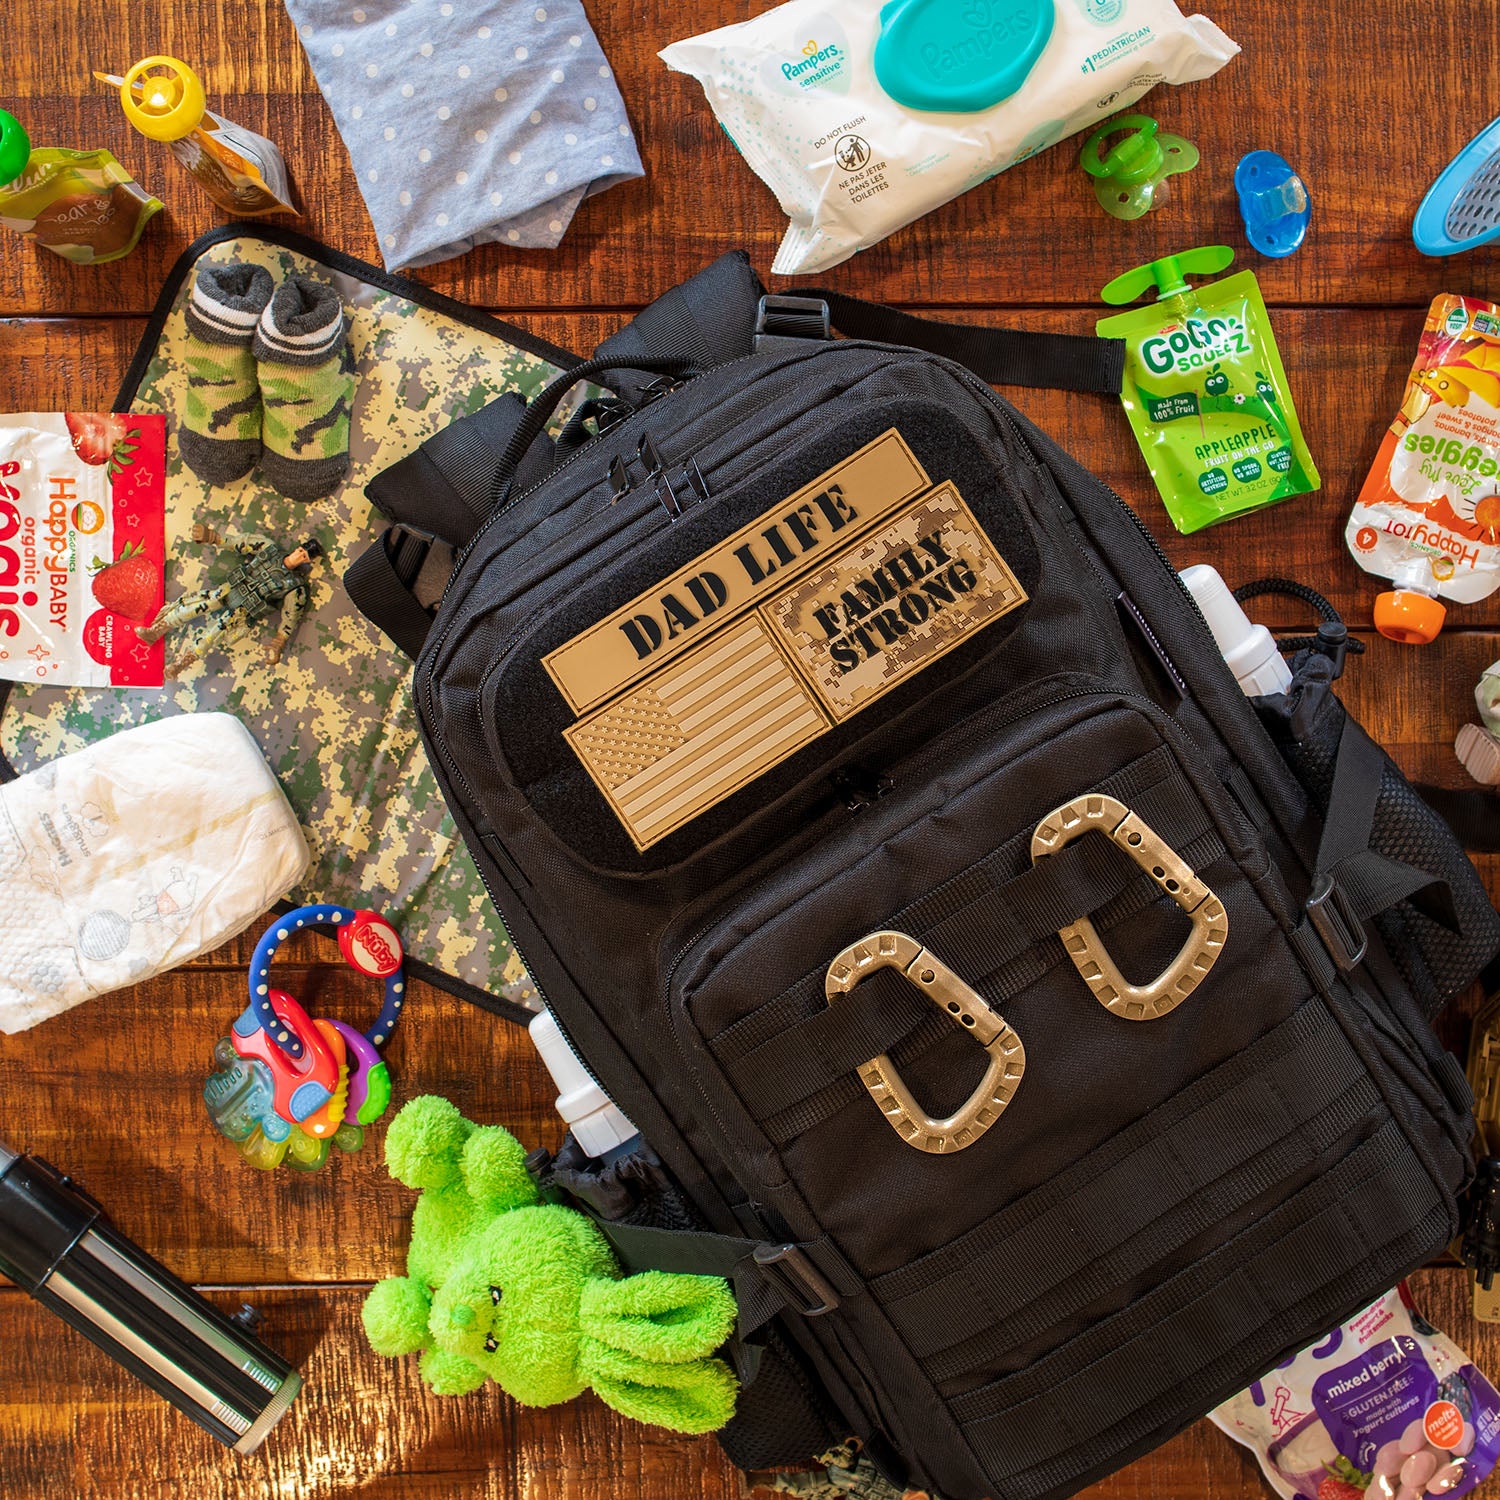 Dad Diaper Bag with dad life patches laying on table with baby gear